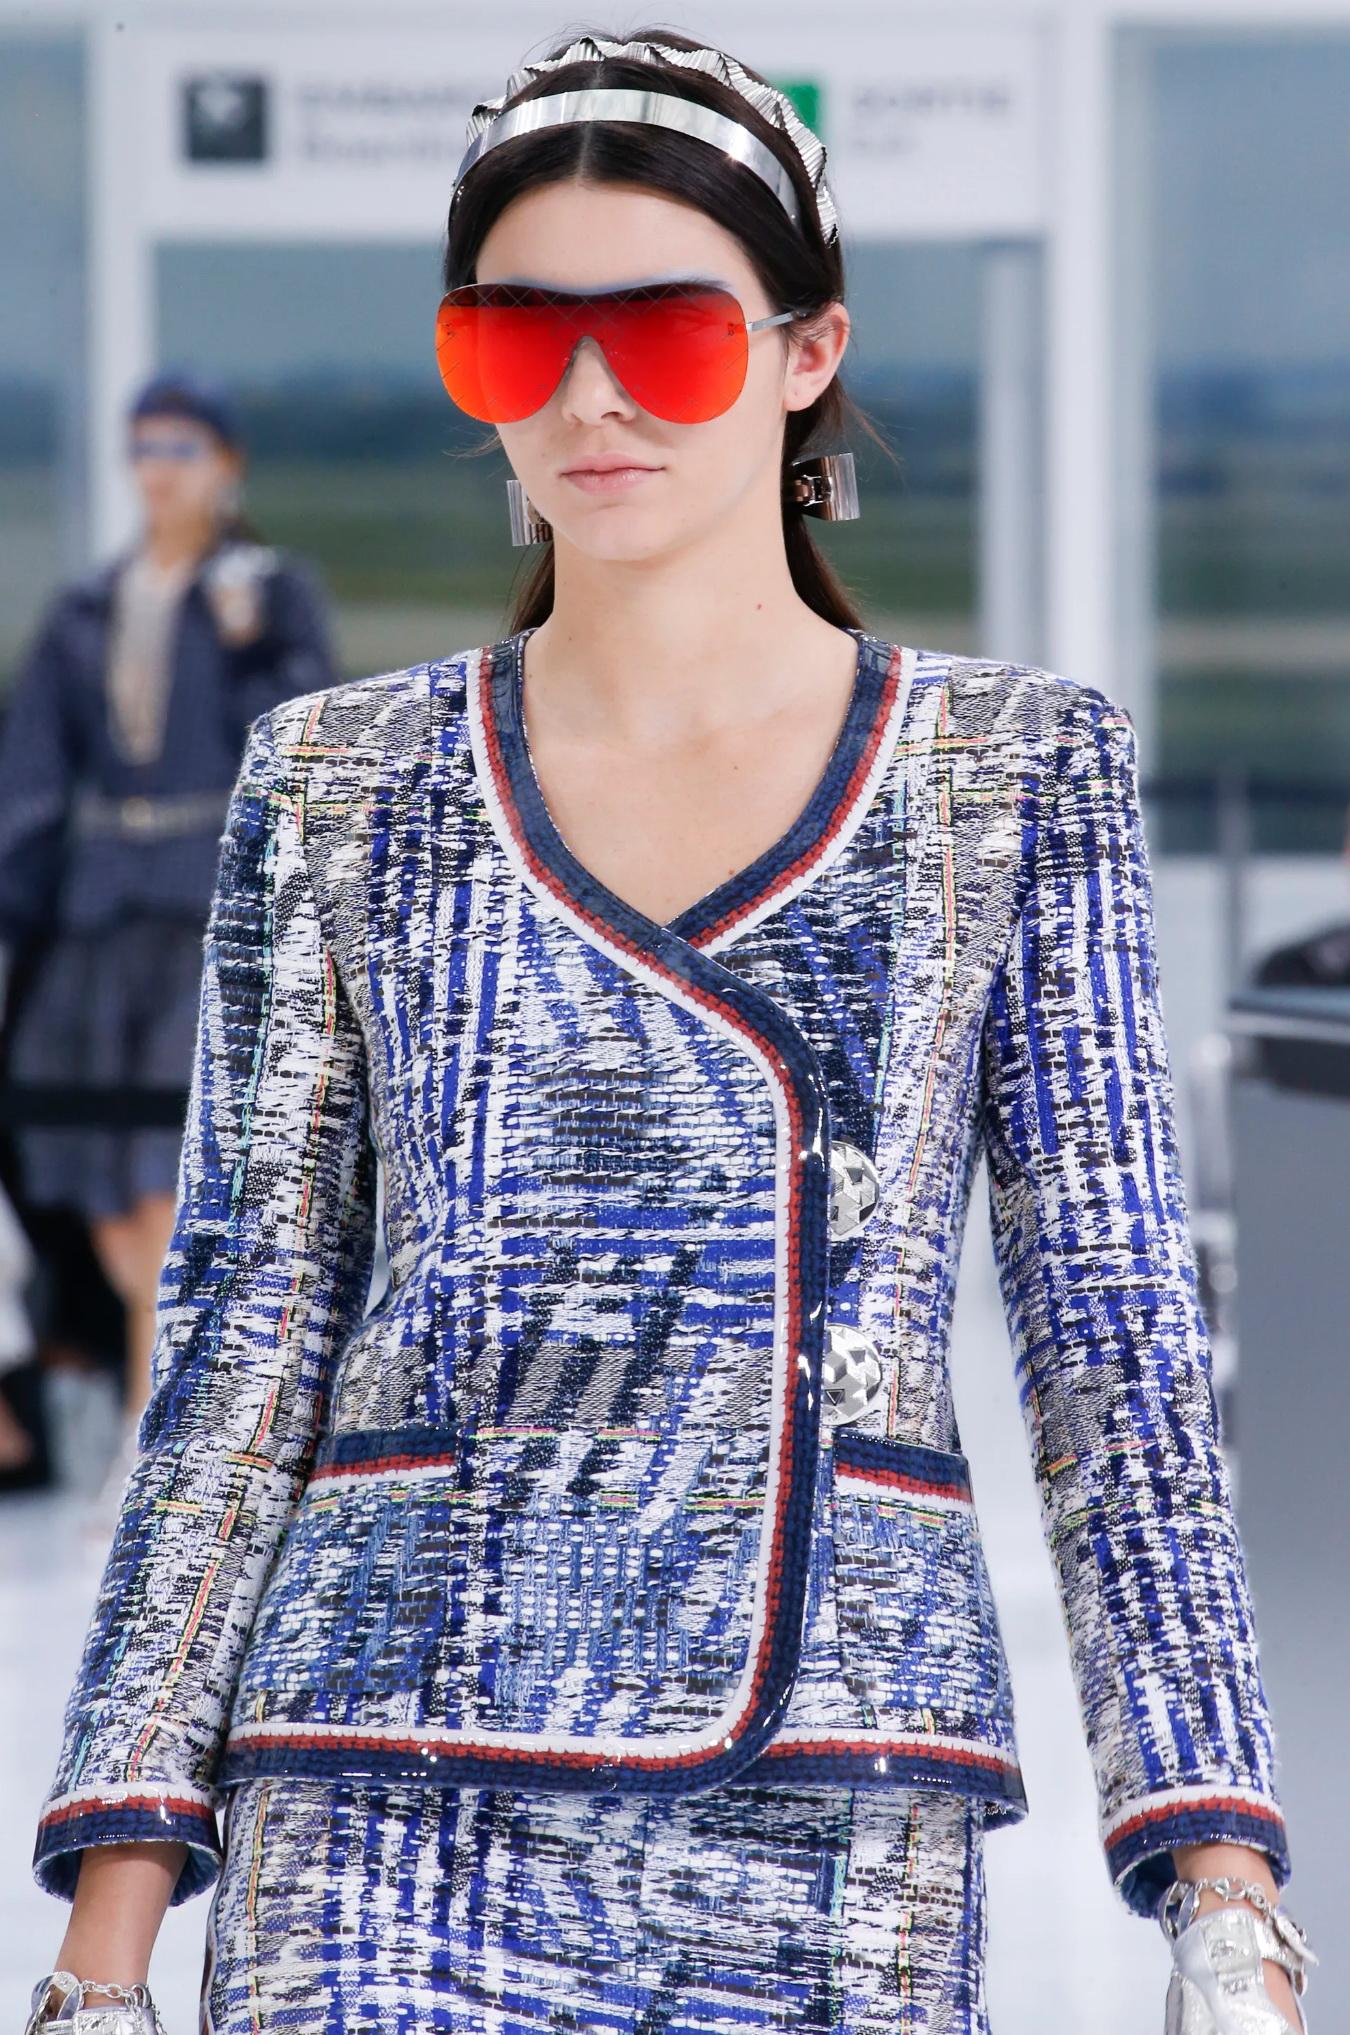 New W/ Tags Chanel Spring 2016 Kendall Jenner 